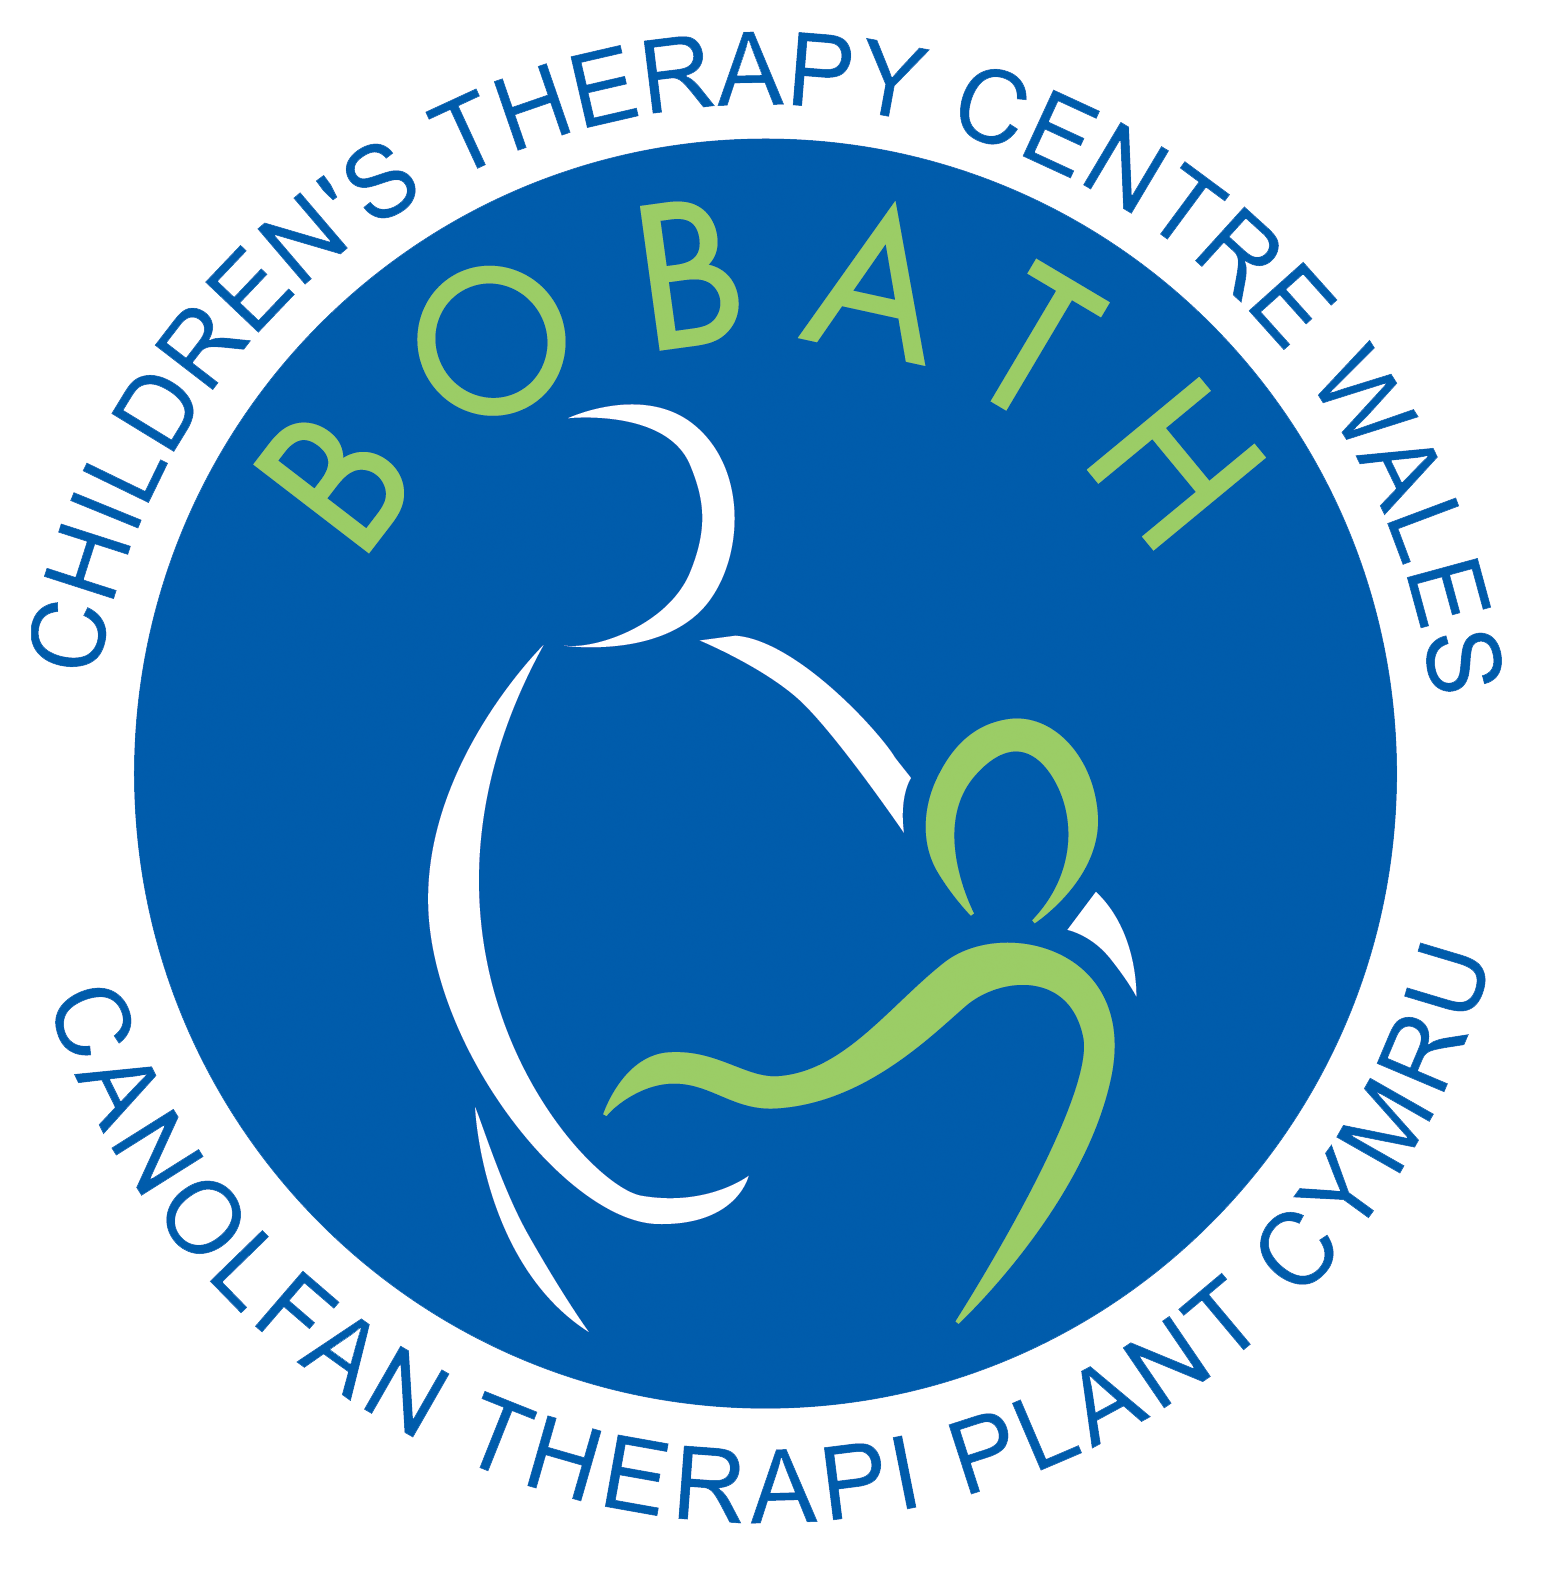 Wales Logo - Bobath Children's Therapy Centre Wales